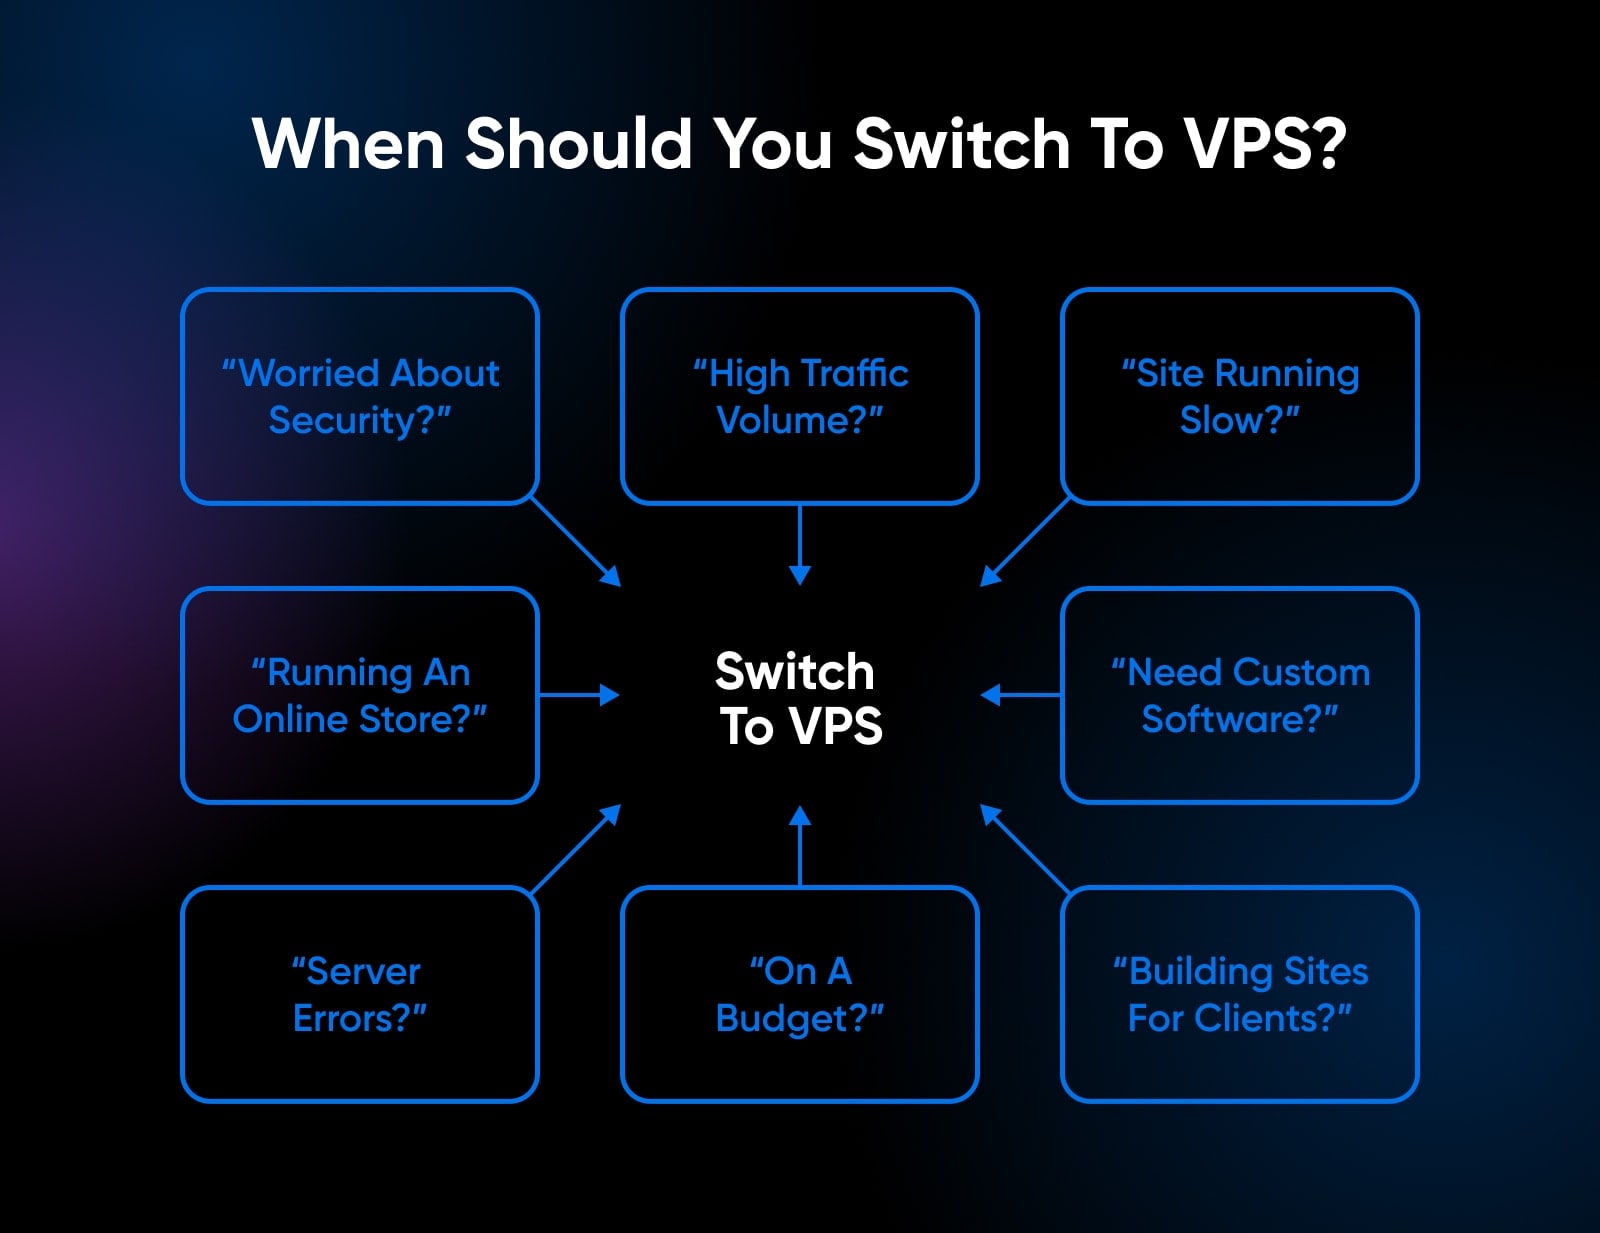 When Should You Switch To VPS